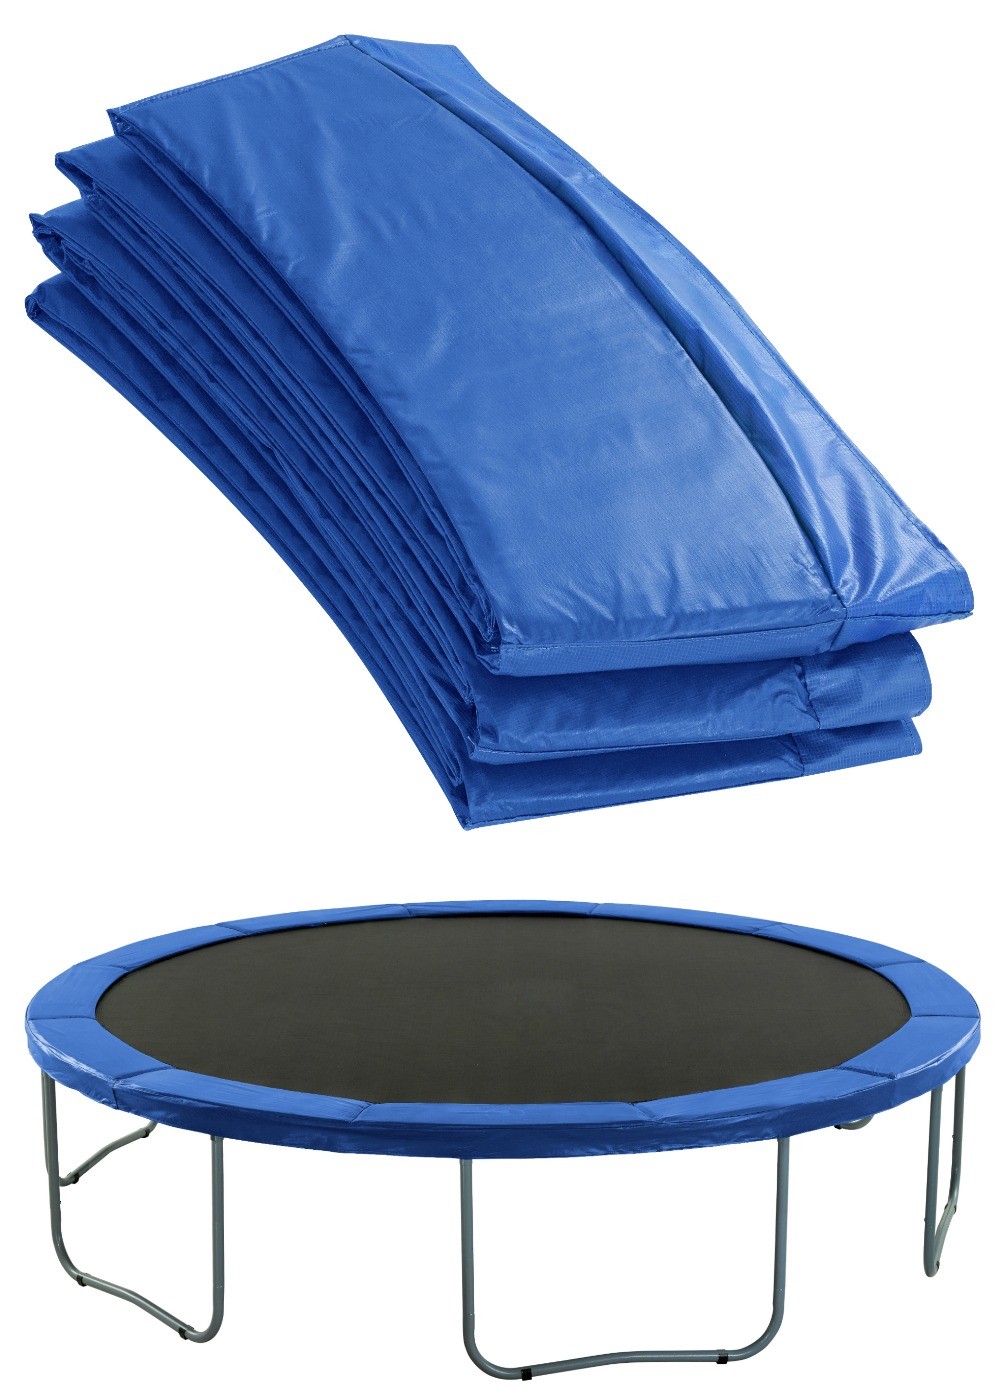 Premium Trampoline Replacement Safety Pad (Spring Cover) | Padding for 396cm 13ft Trampoline | Blue